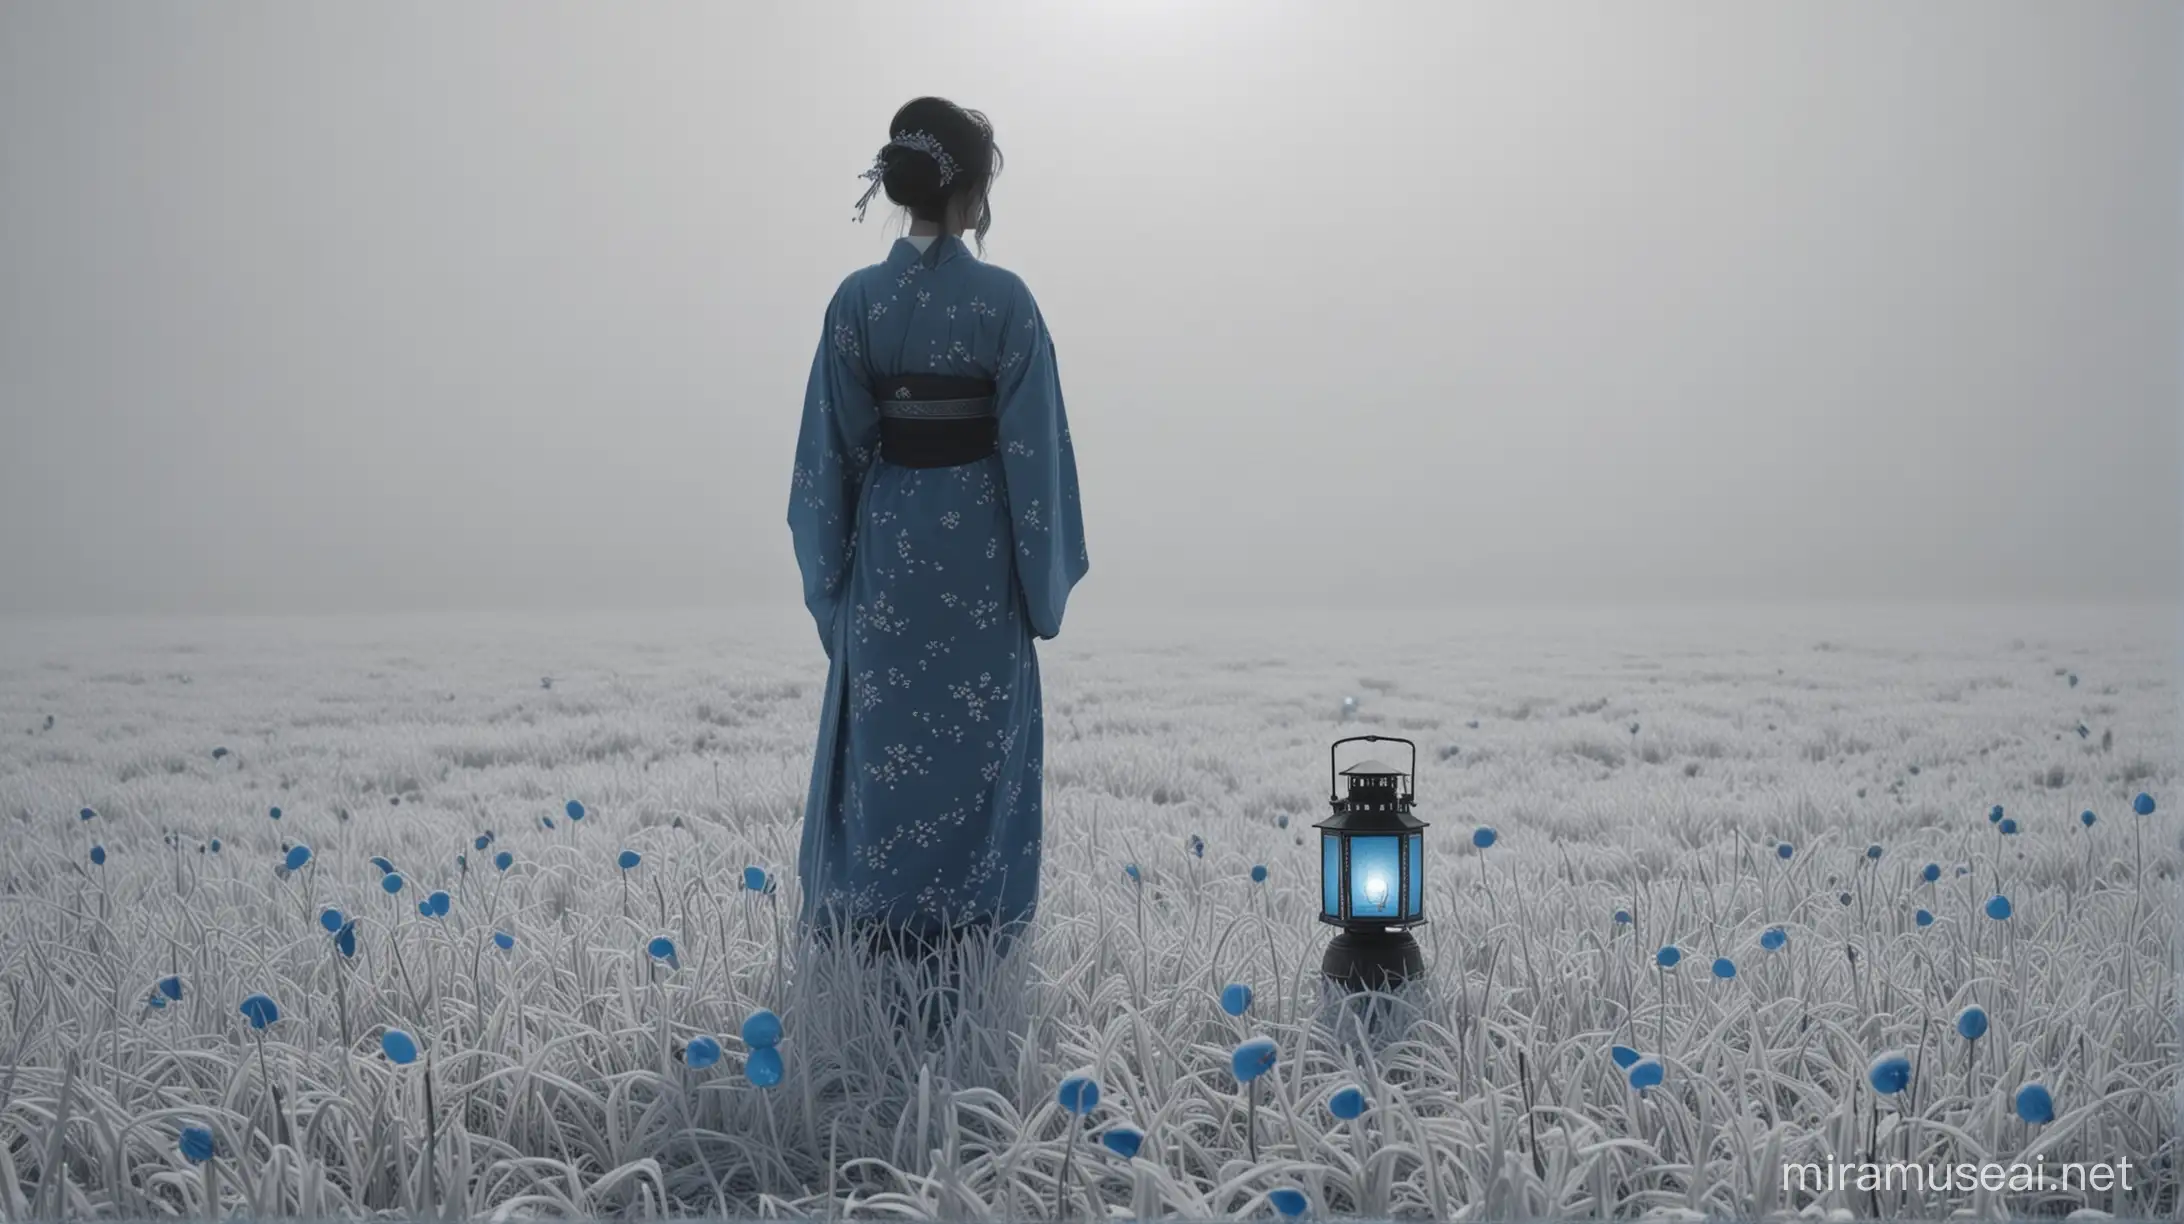 a lady in japanese costume with a blue lantern standing alone in a white frosty field. Whole scene is black and white just the lantern is blue colored and lady is splashed with blue also, 4K realistic close up shot